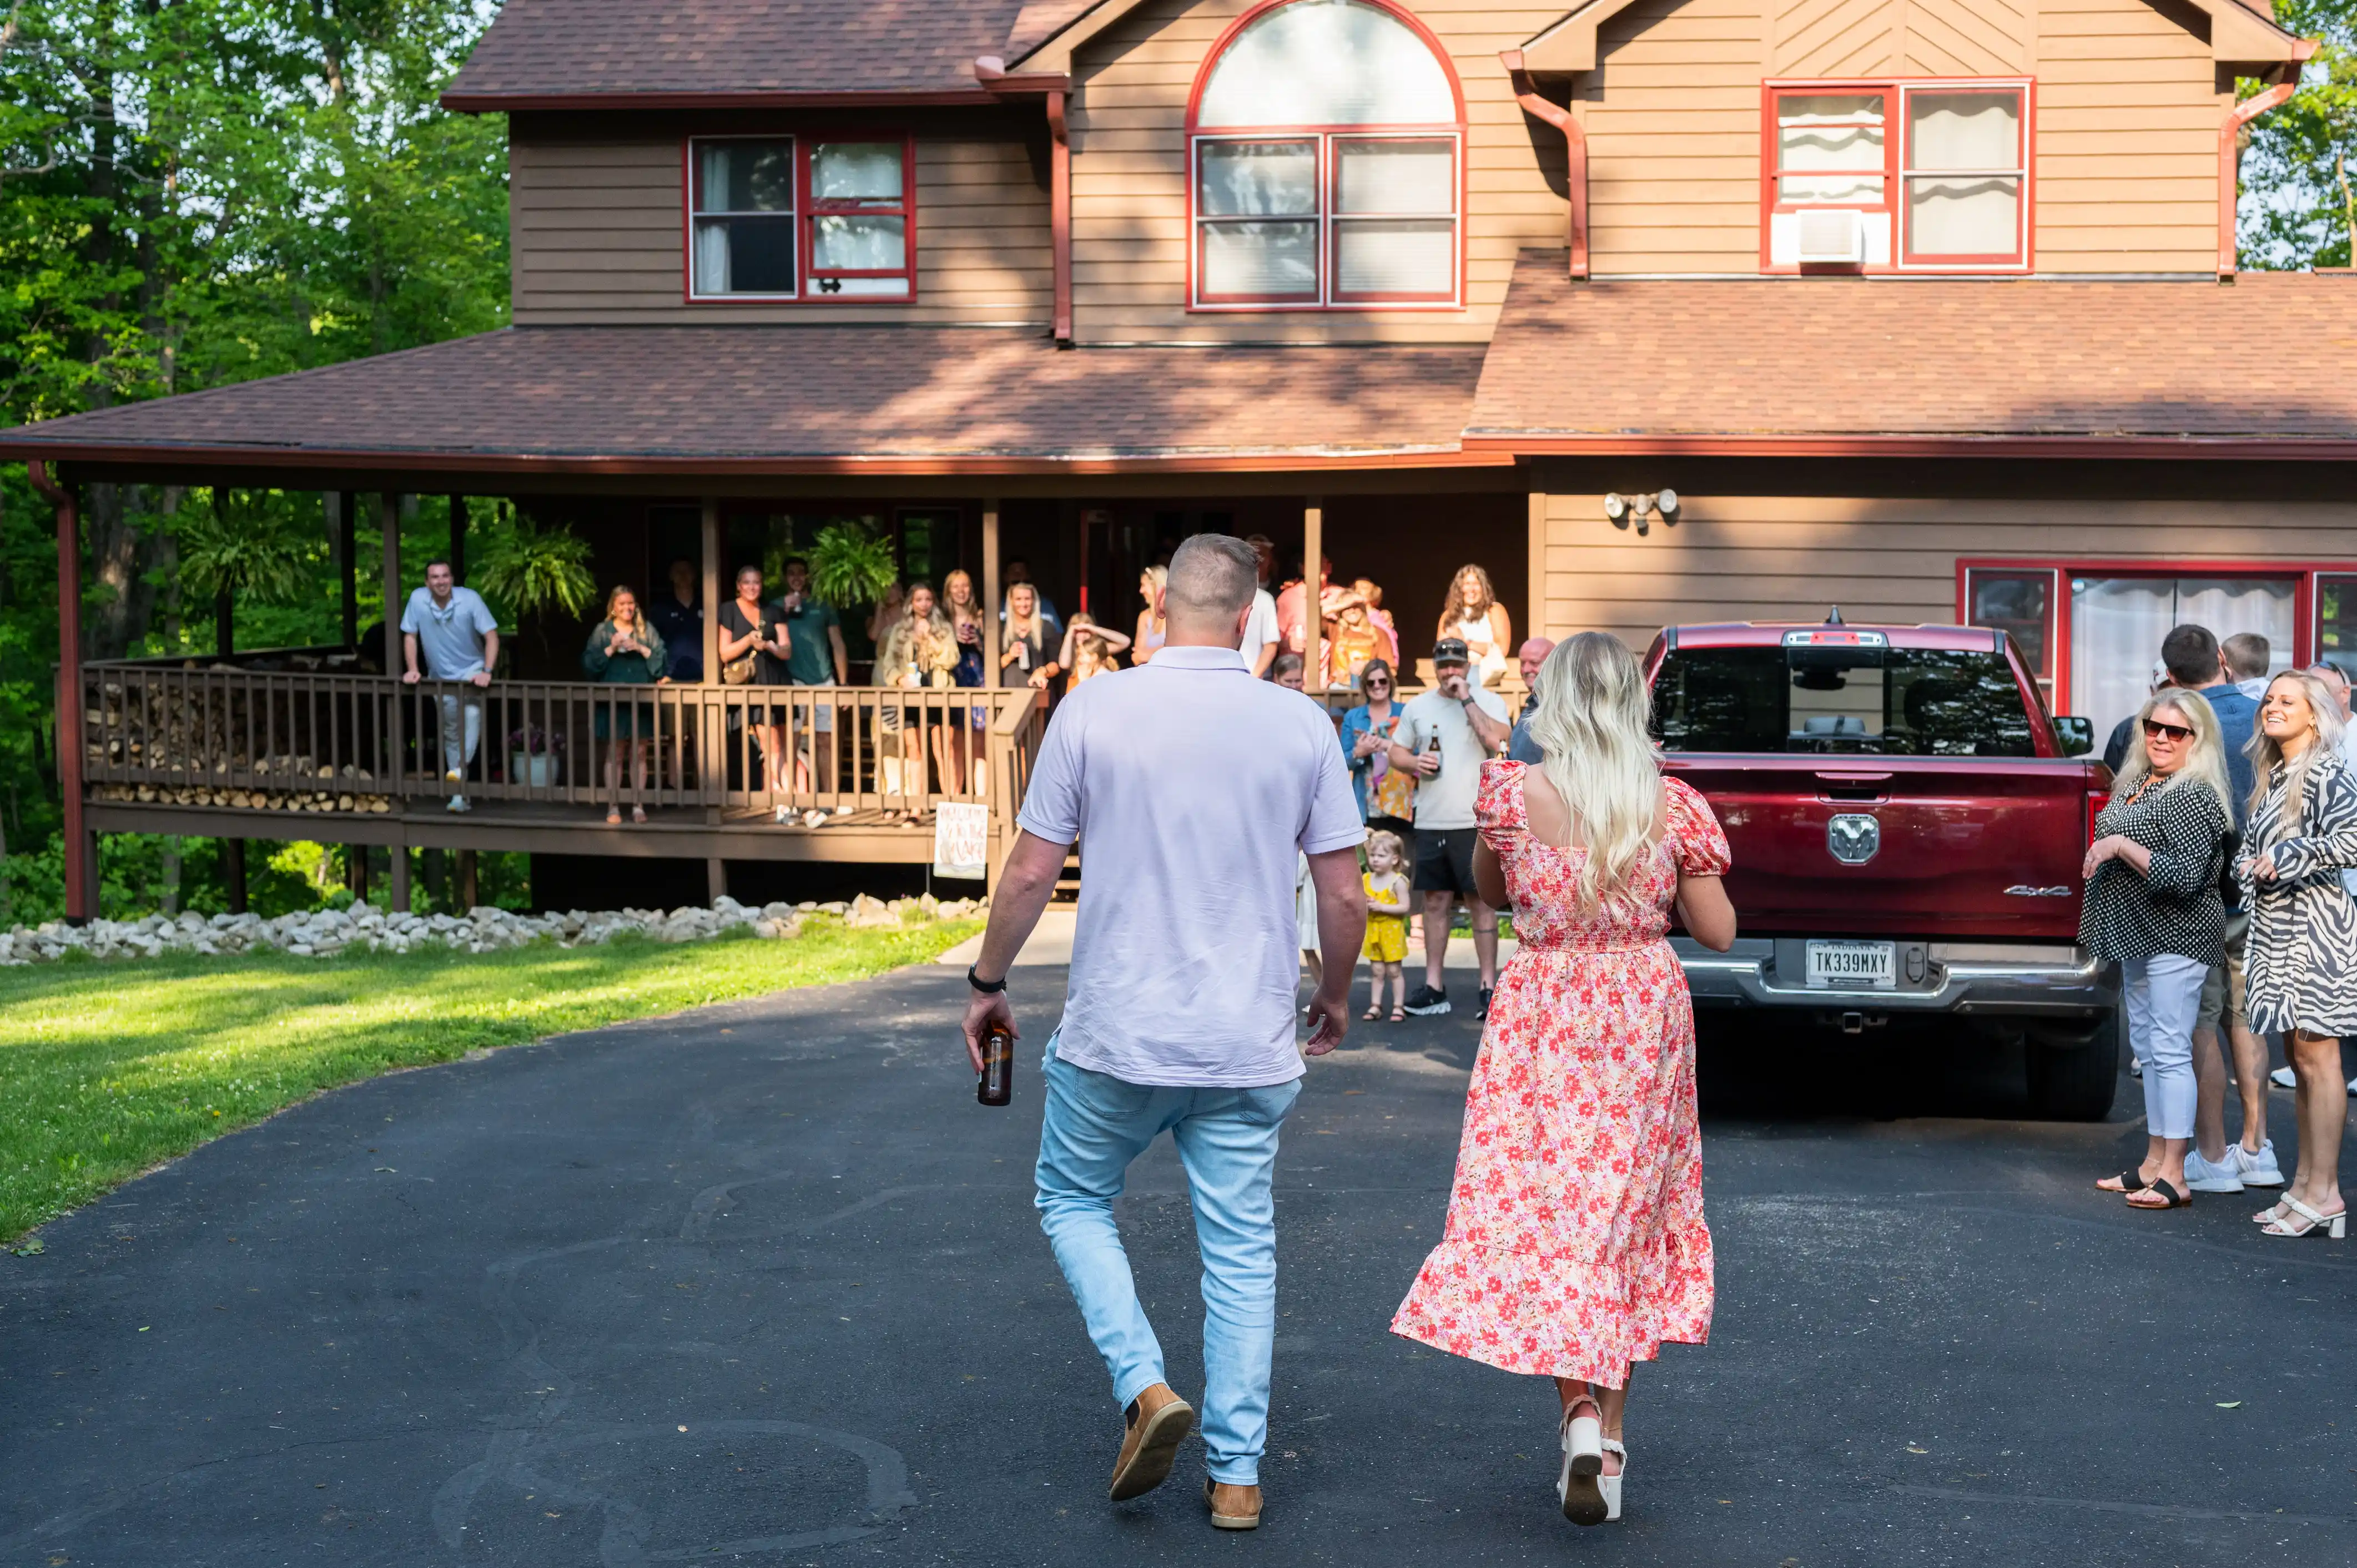 Two people walking towards a house where a group of guests are gathered on the porch for a social event.